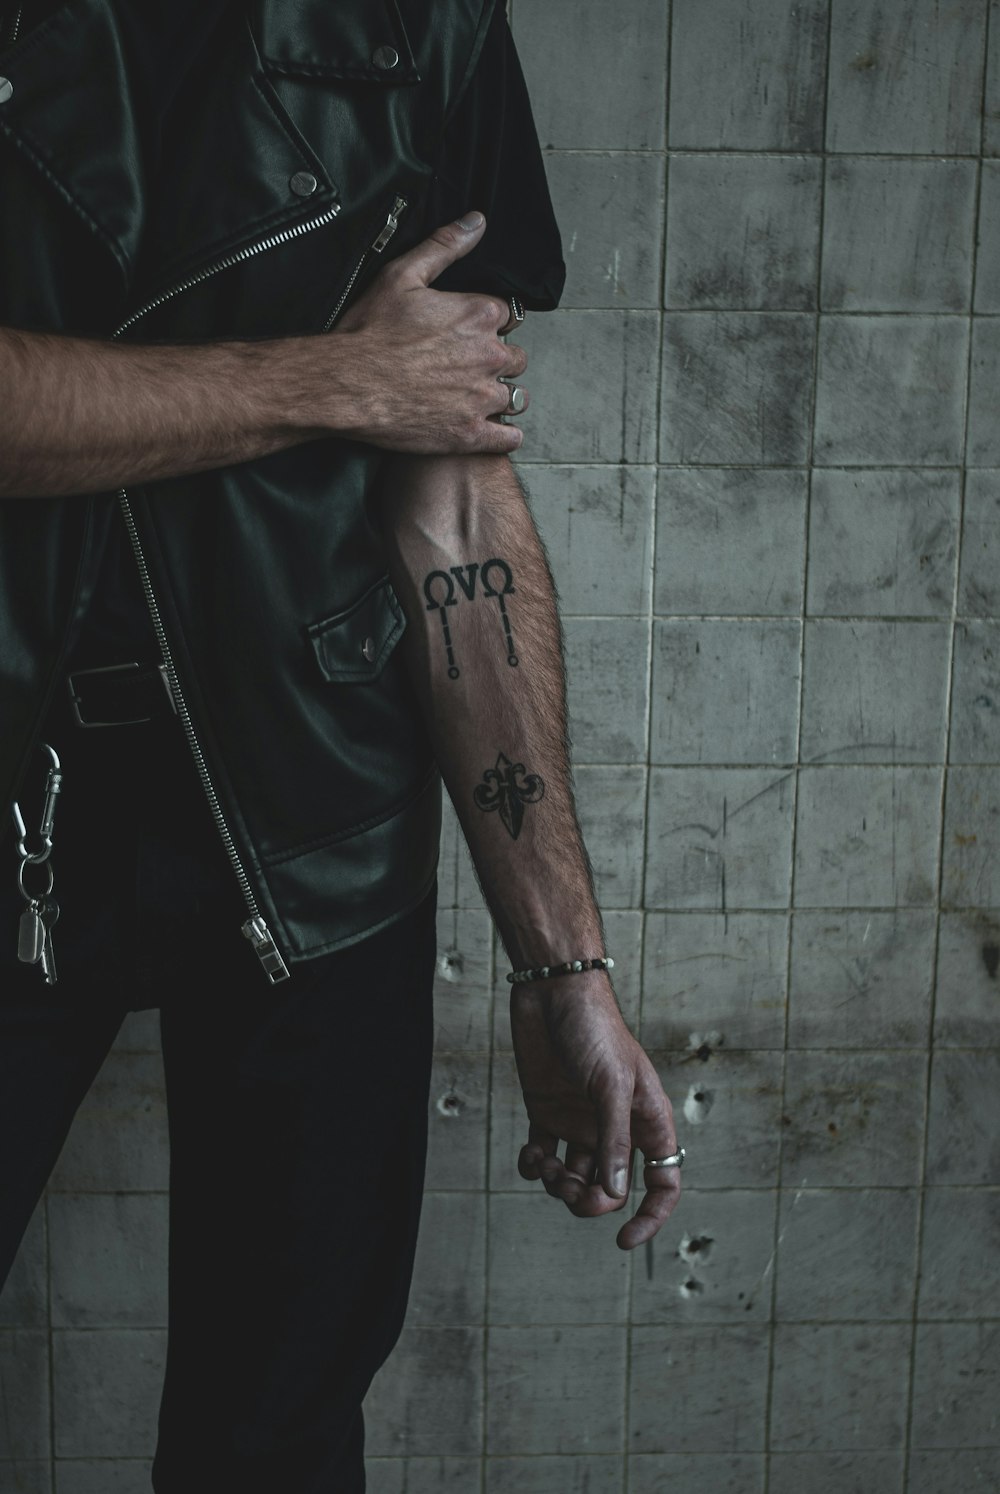 black tribal tattoo on person's left arm